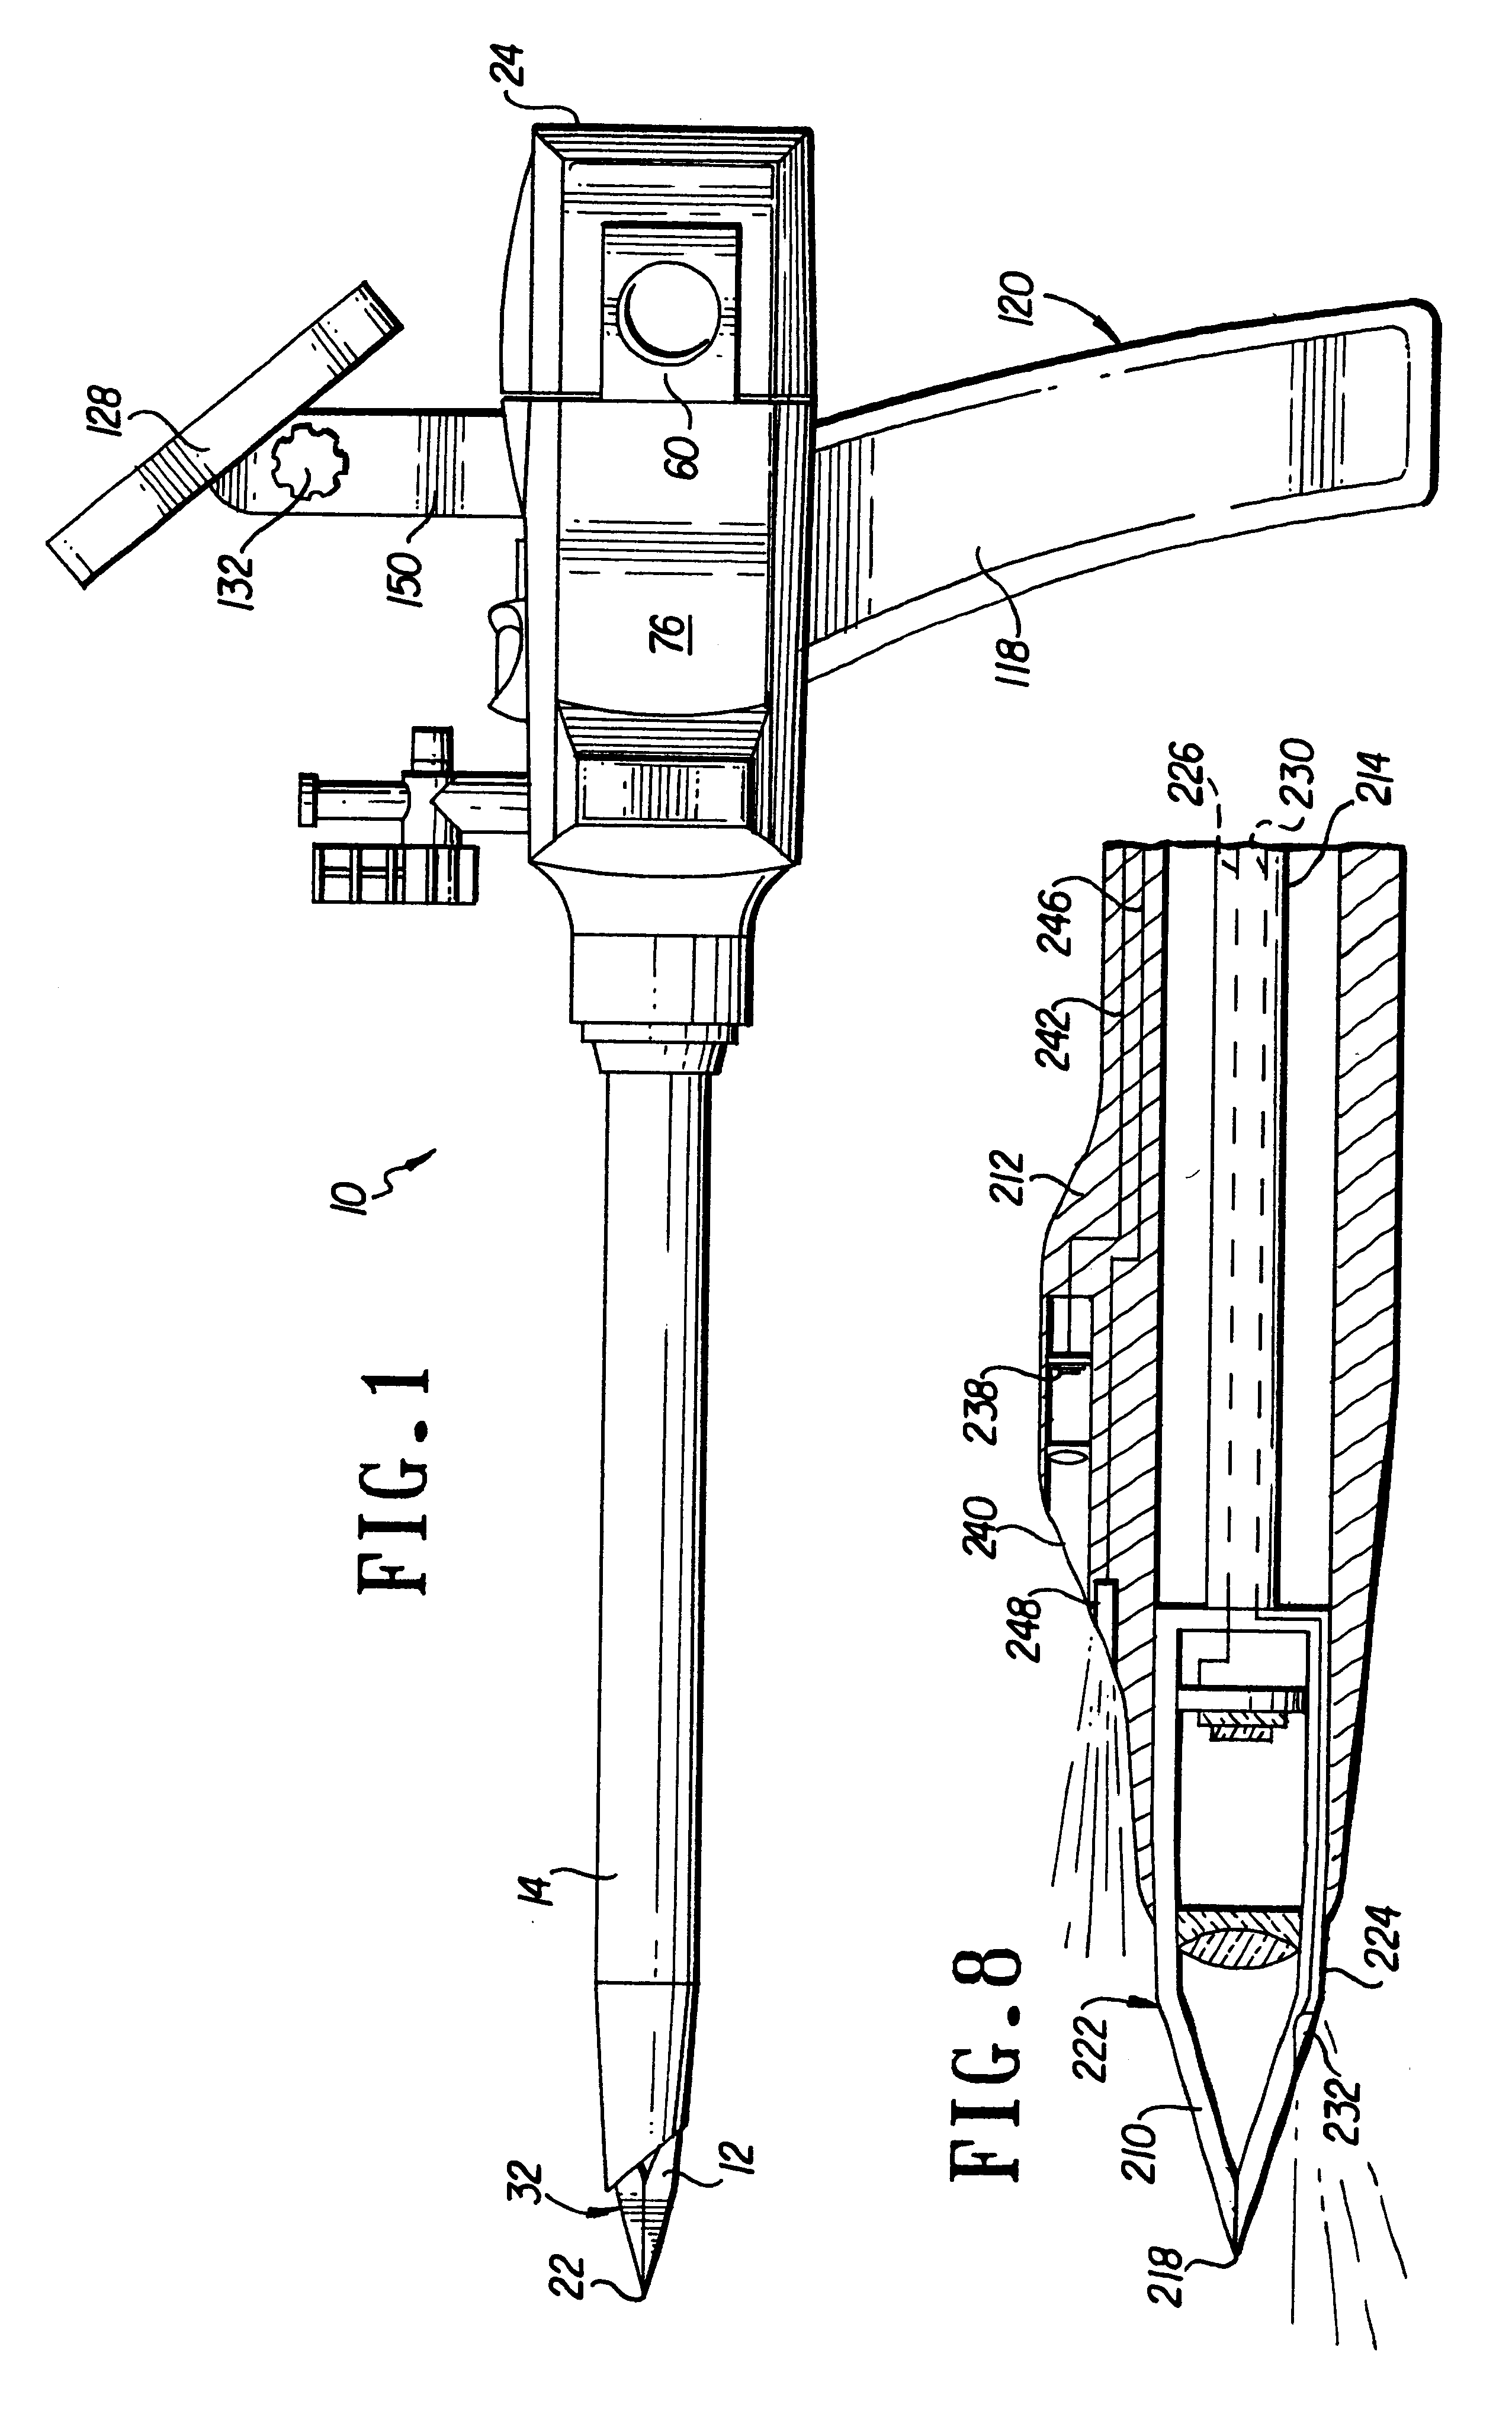 Penetrating endoscope and endoscopic surgical instrument with CMOS image sensor and display